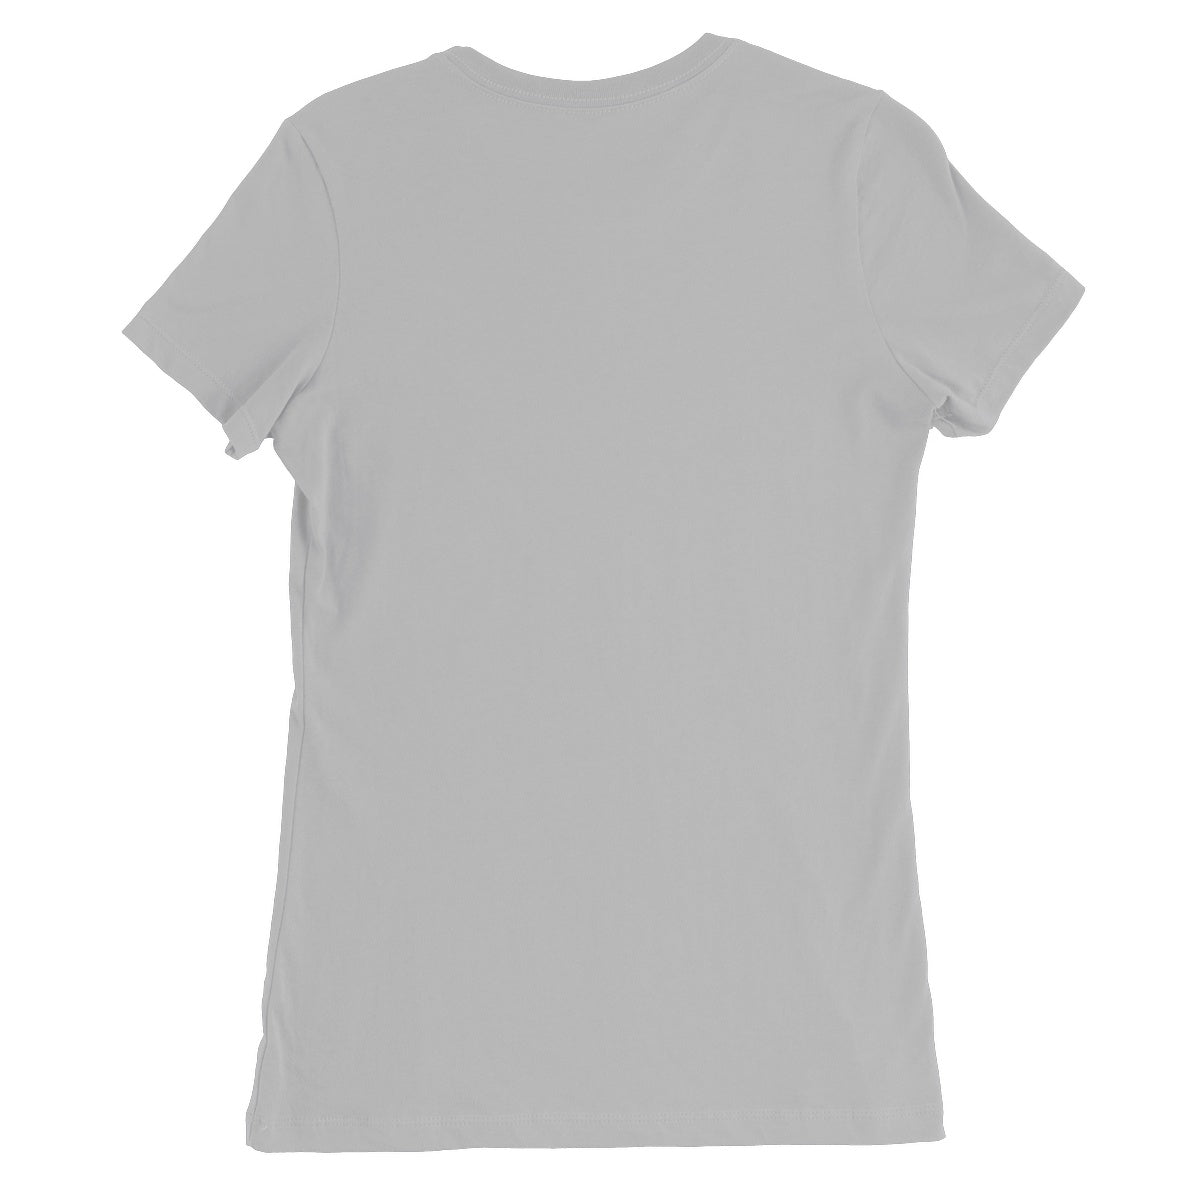 George Illustrated Tee Women's Favourite T-Shirt